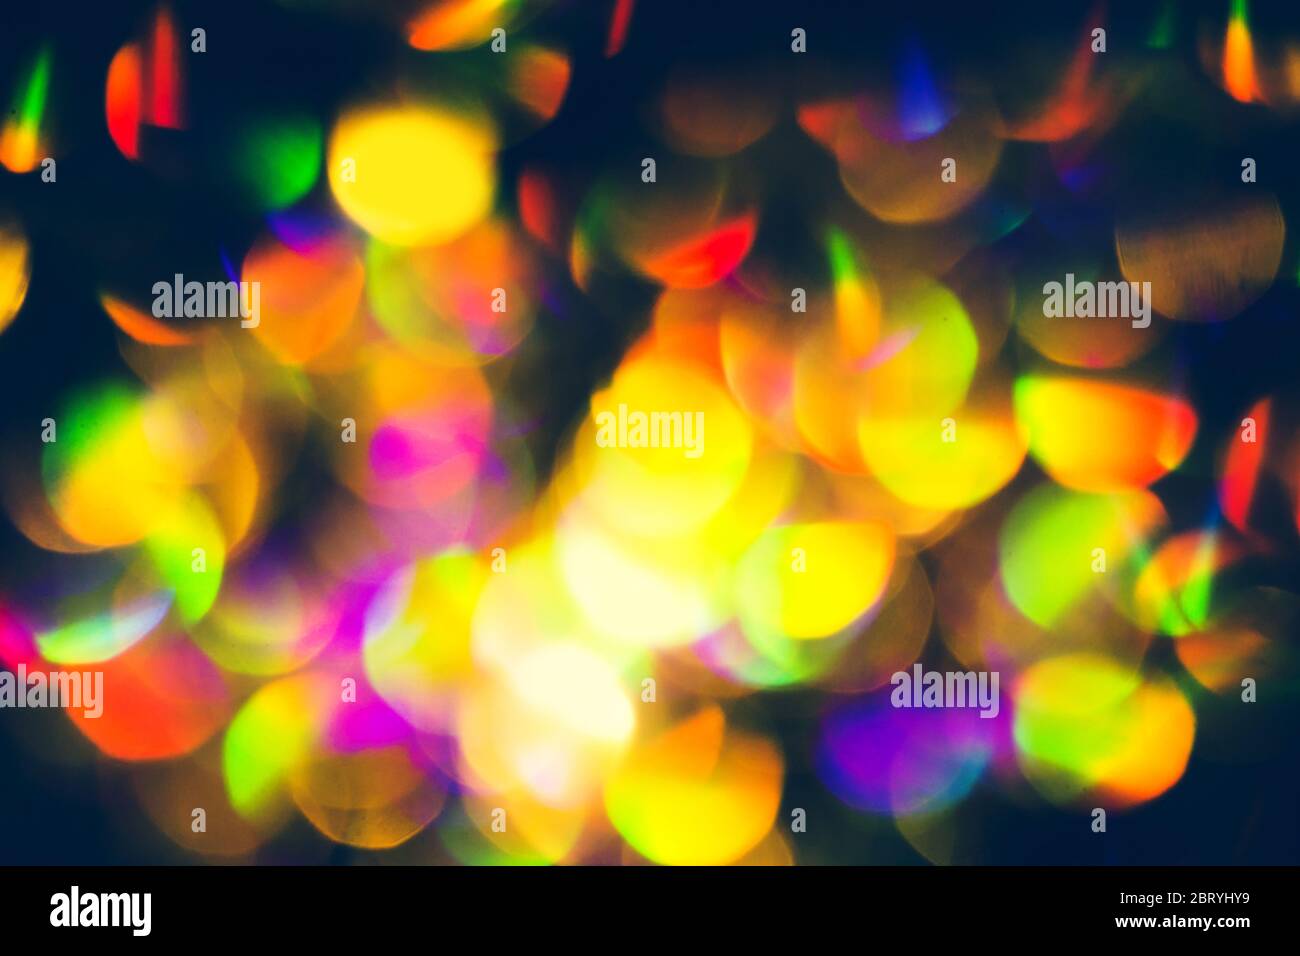 Abstract blurred background of glitter lights of different colors. Out of focus. Stock Photo